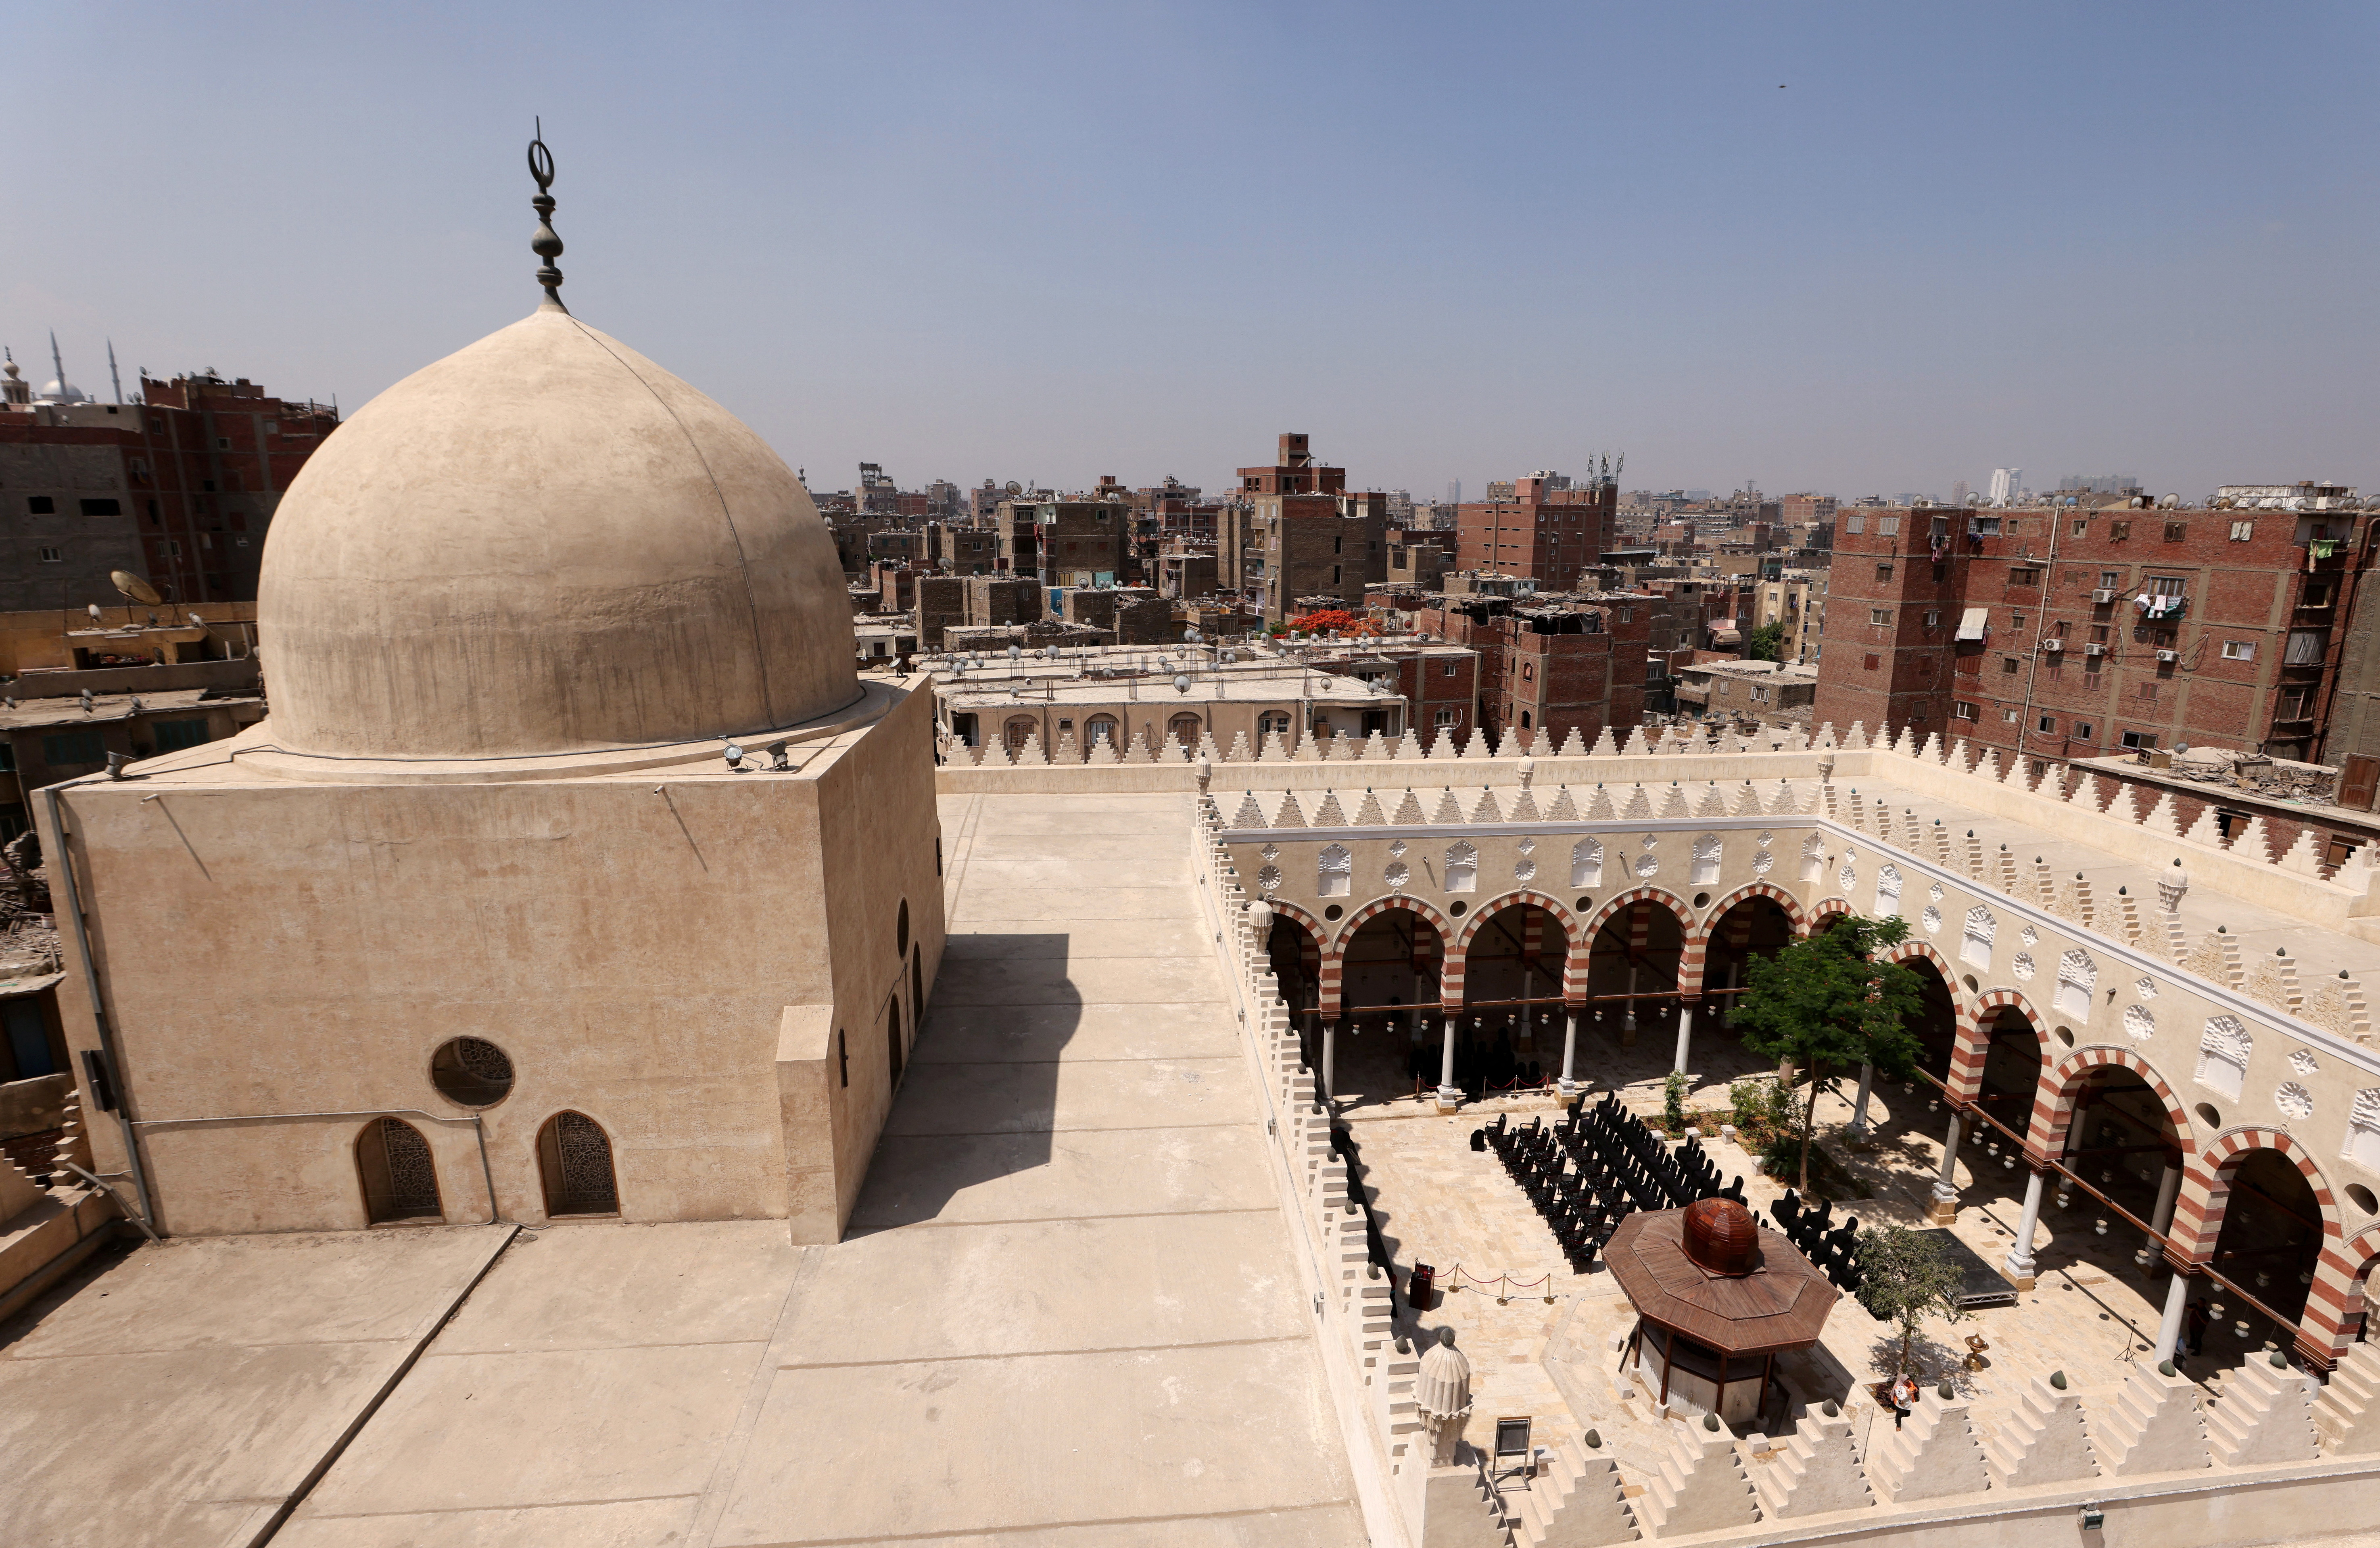 A view of the Mosque of Amir al-Maridani, in Cairo